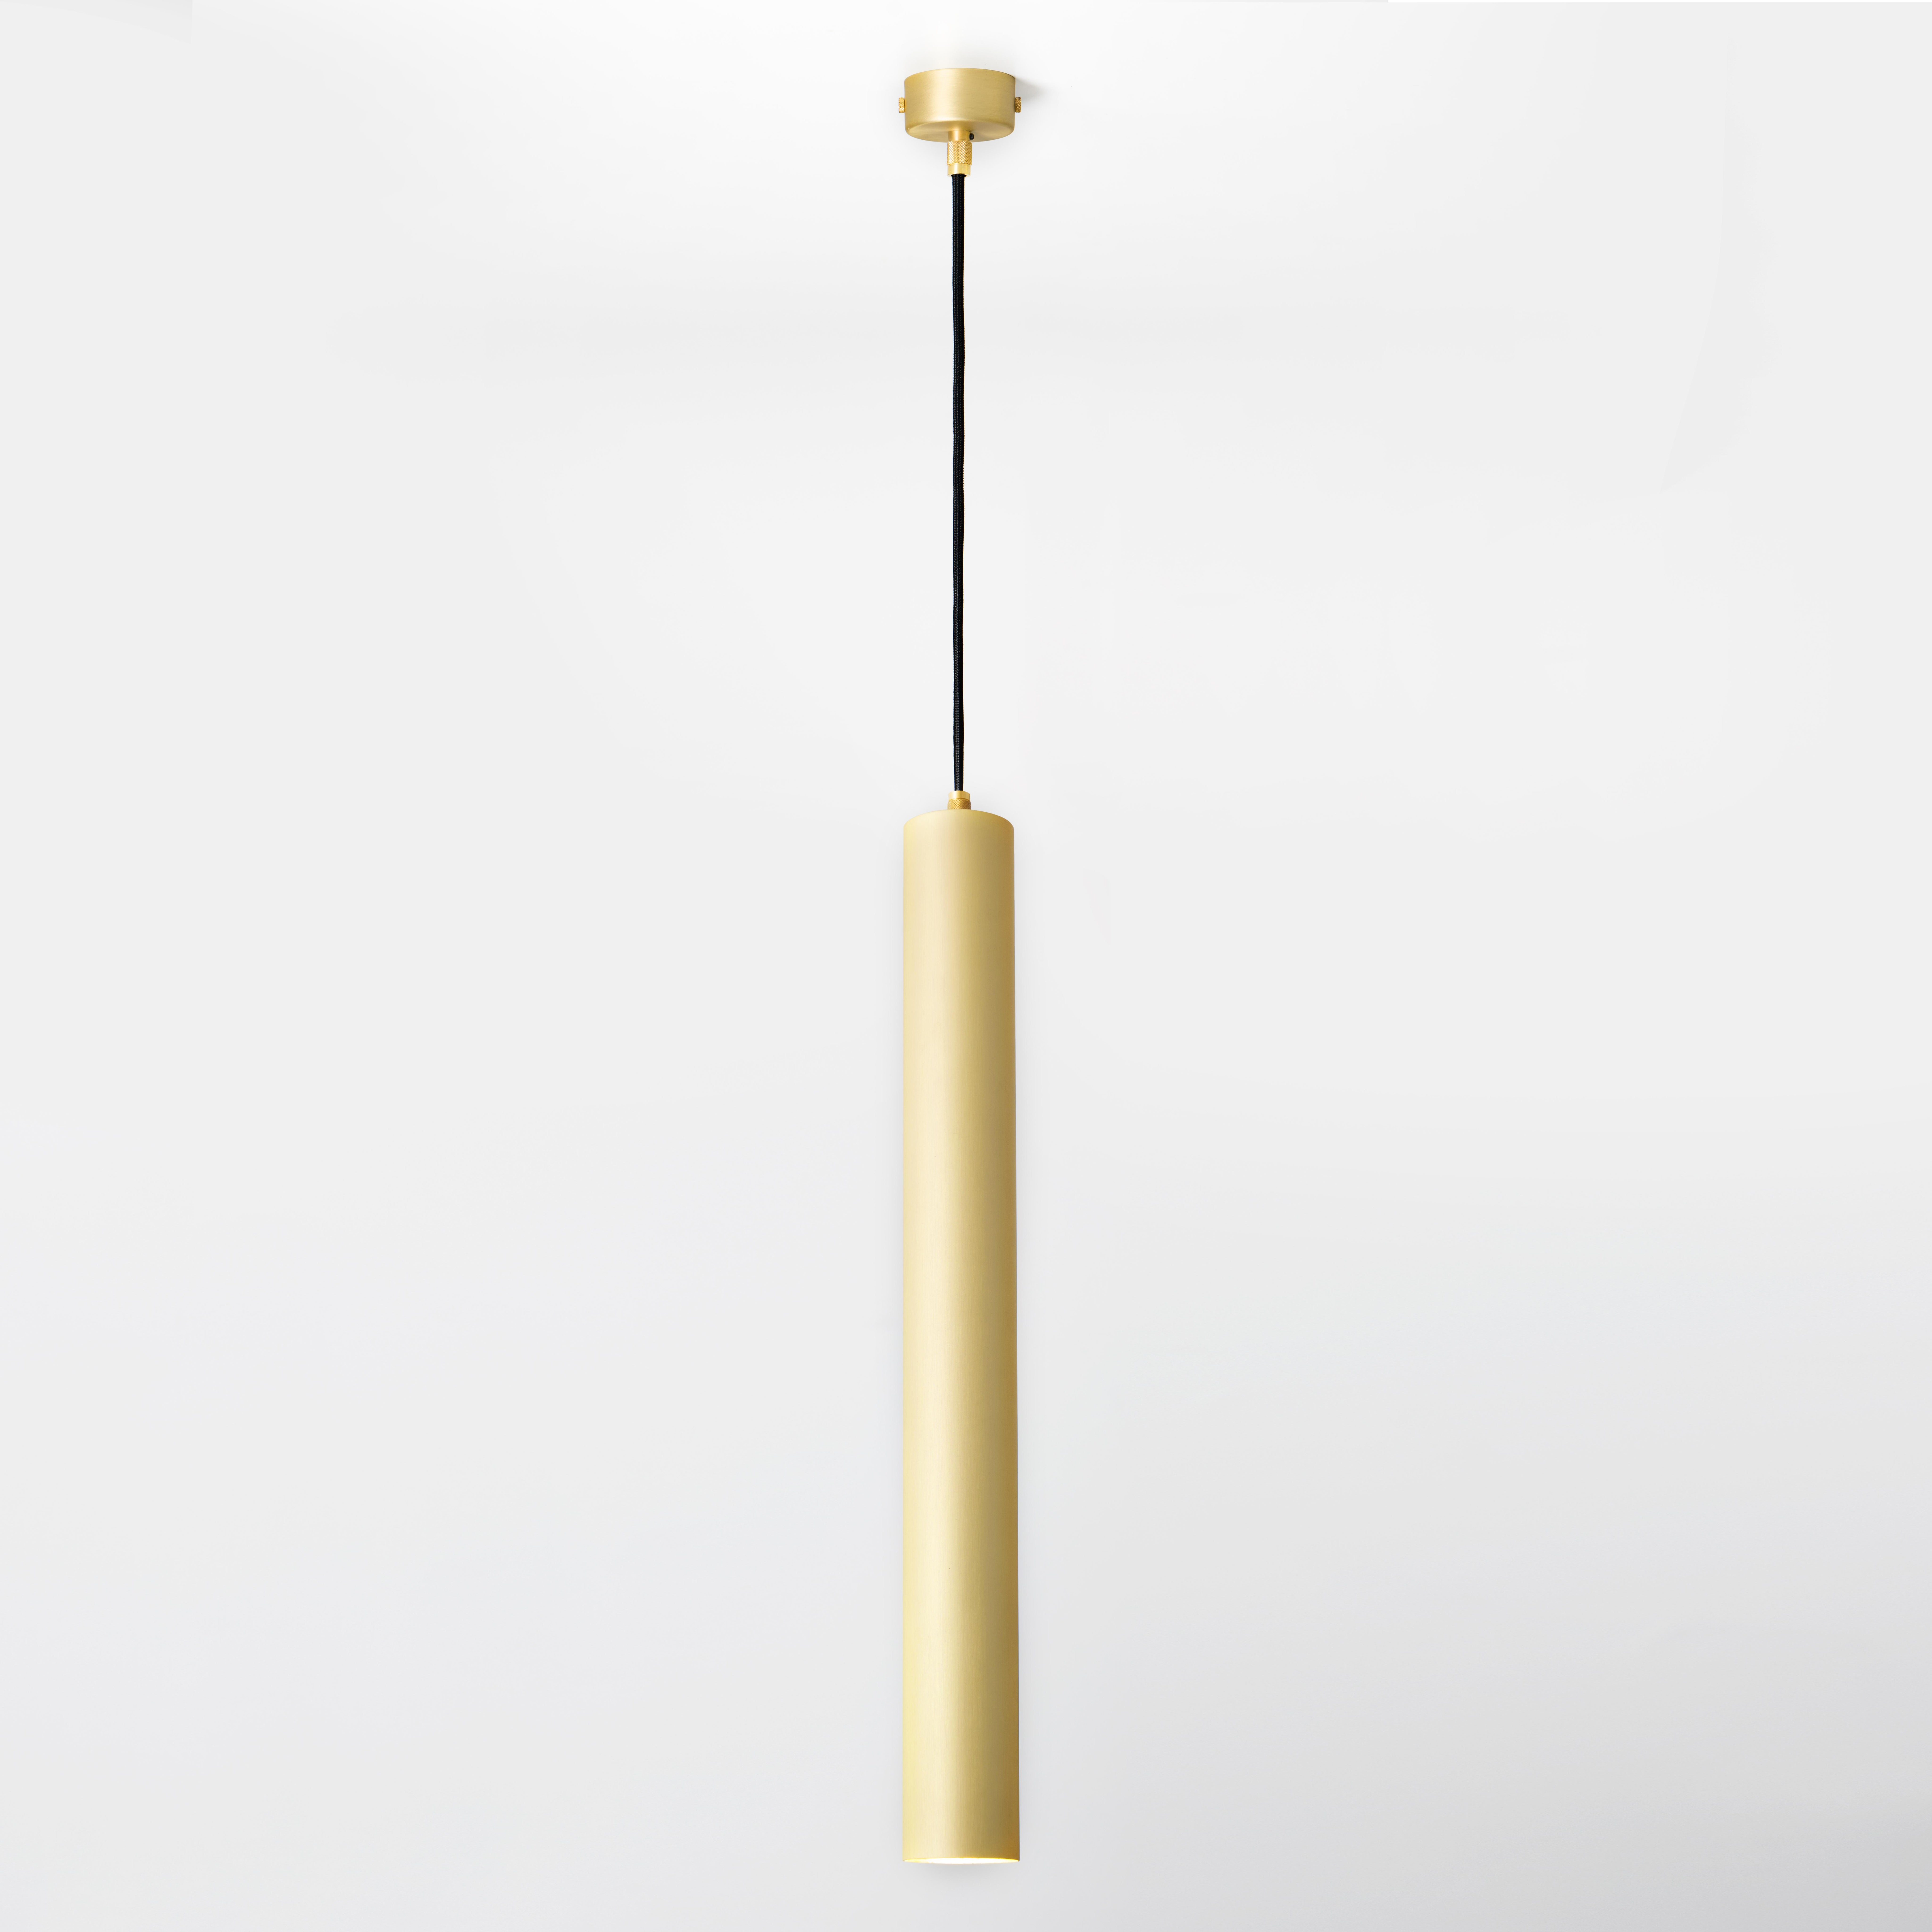 Luster pendant by Luce Tu
Dimensions: 550 mm x 60 mm
Materials: Brass

State-of-the-art technology and craftsmanship come together in this suspension with an almost timeless charm. Like a precious jewel, the Sbarlusc collection is perfect for